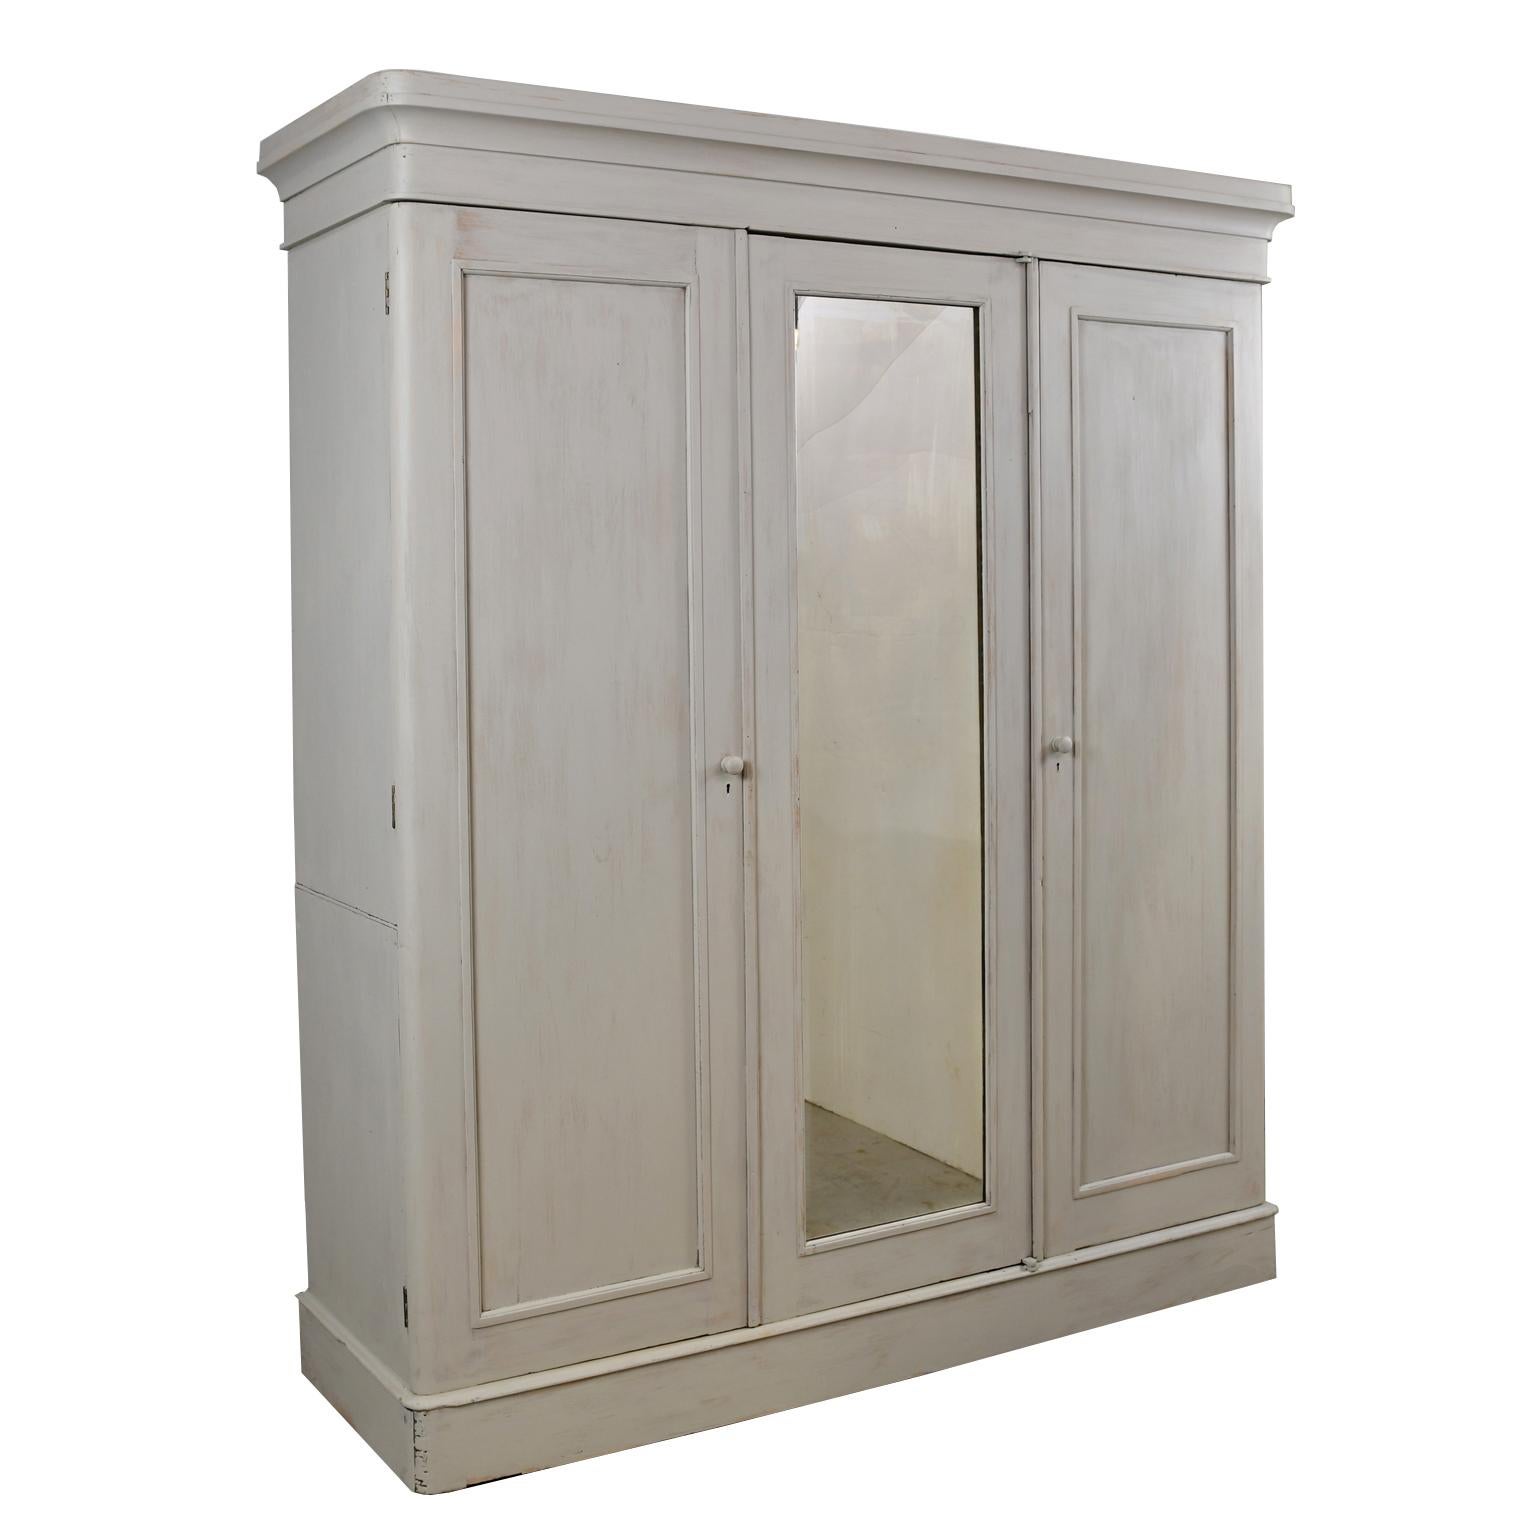 English Edwardian Pine Wardrobe in Painted Limed Finish with Interior Drawers 3